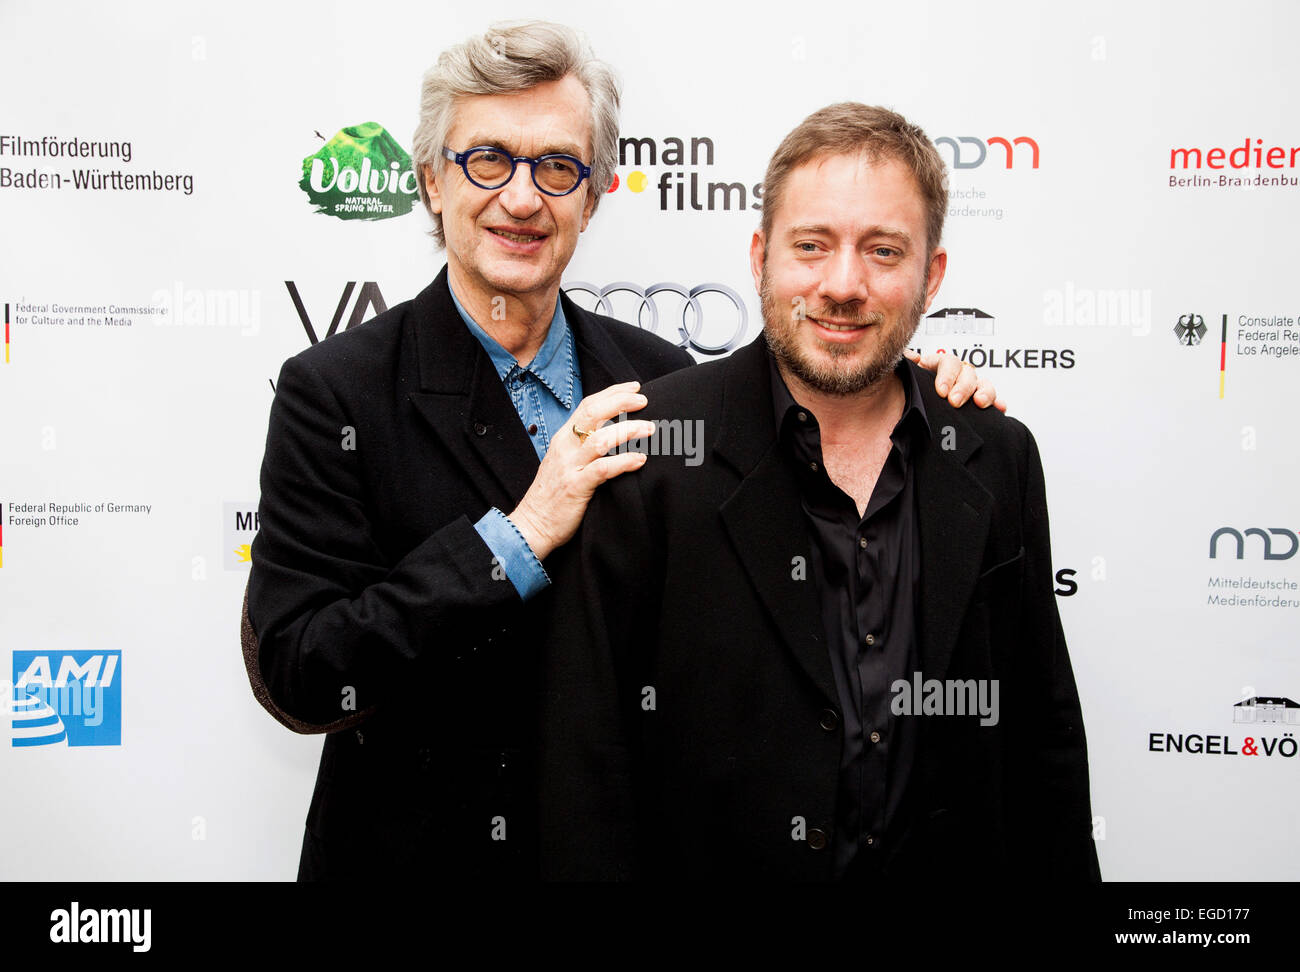 Wim Wenders and Juliano Salgado at the German Films and the Consulate General of the Federal Republic Of Germany's German Oscar nominees reception held at Villa Aurora in Pacific Palisades on February 21, 2015. Credit: Flaminia Fanale/Lumeimages.com Stock Photo